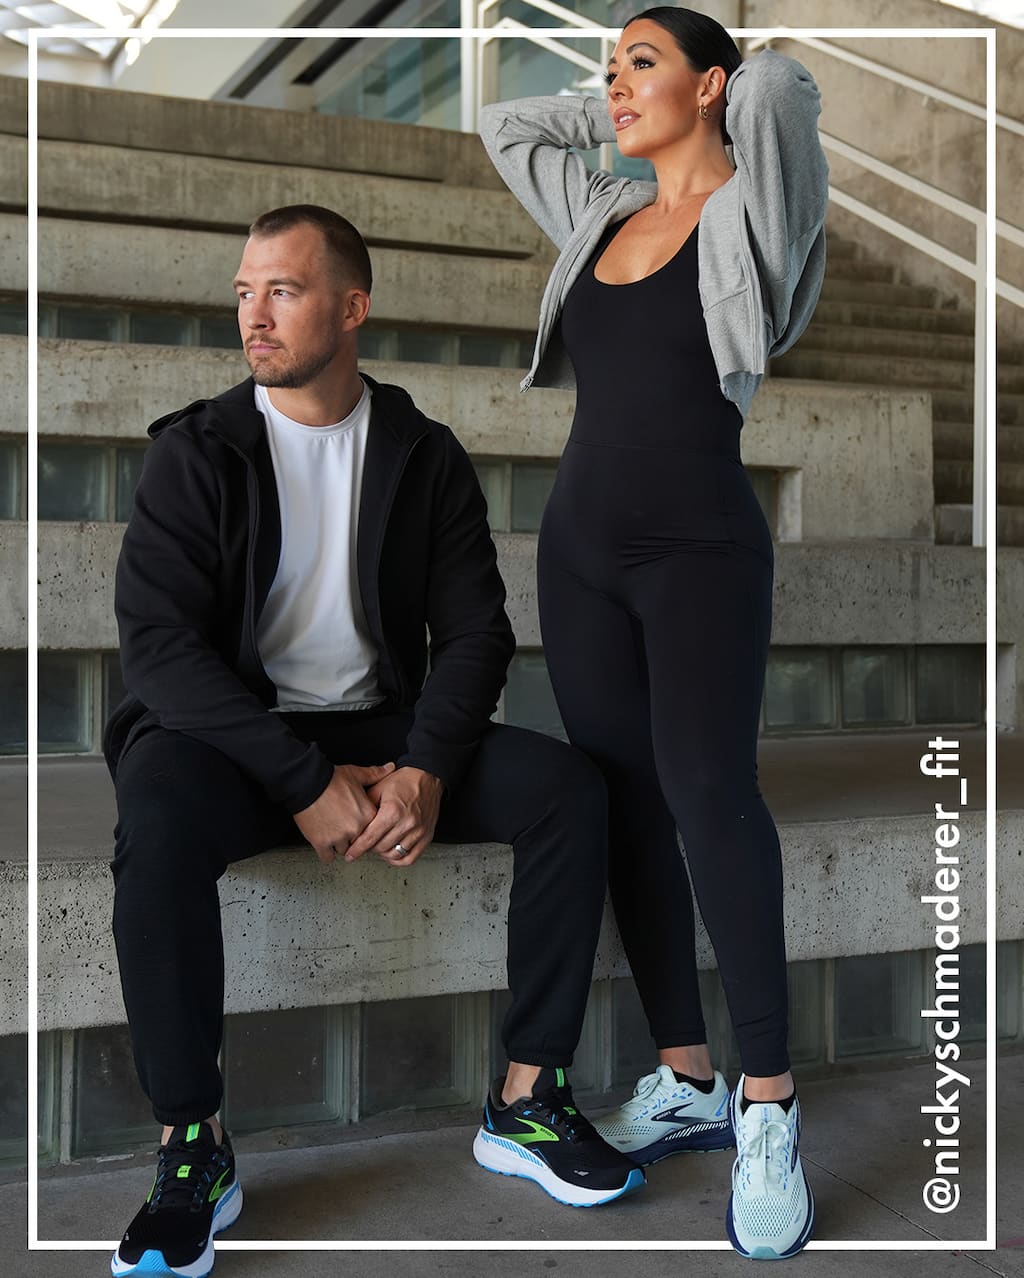 Featuring @nickyschmaderer_fit. Click to shop running shoes.